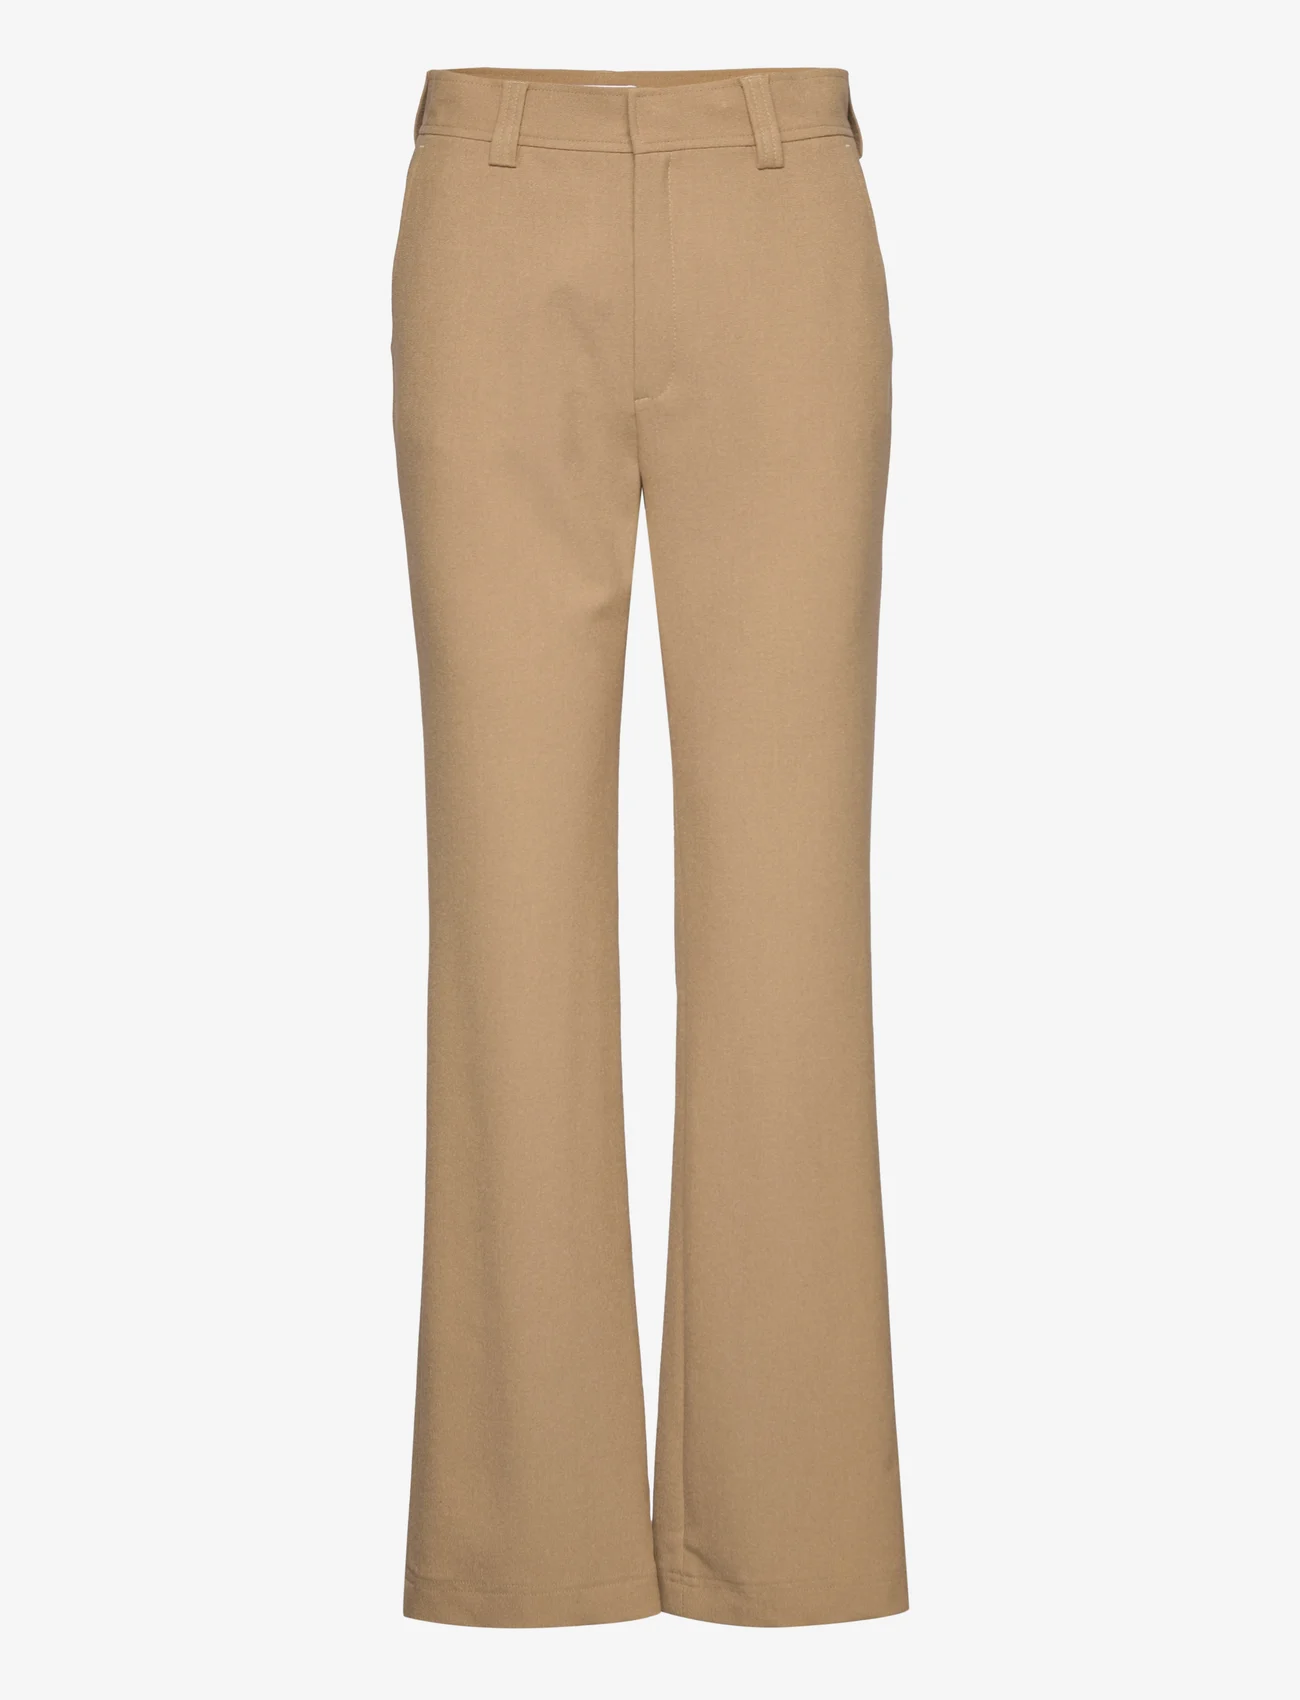 RODEBJER - Rodebjer Aniara - trousers - camel - 0